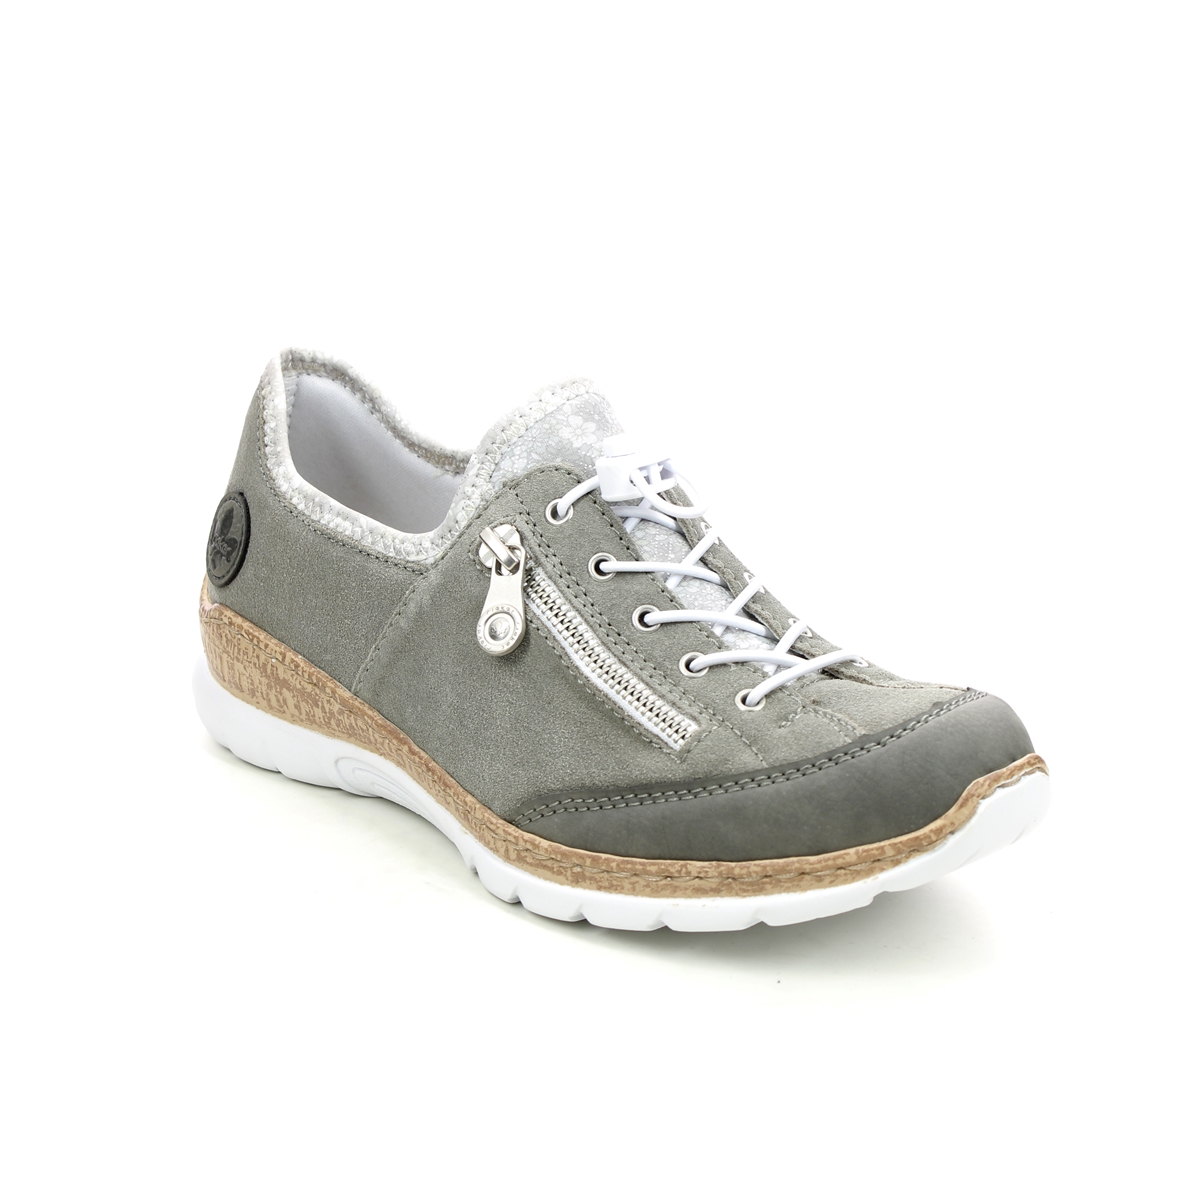 Rieker Empire 11 Taupe Leather Womens Lacing Shoes N42F1-40 In Size 39 In Plain Taupe Leather